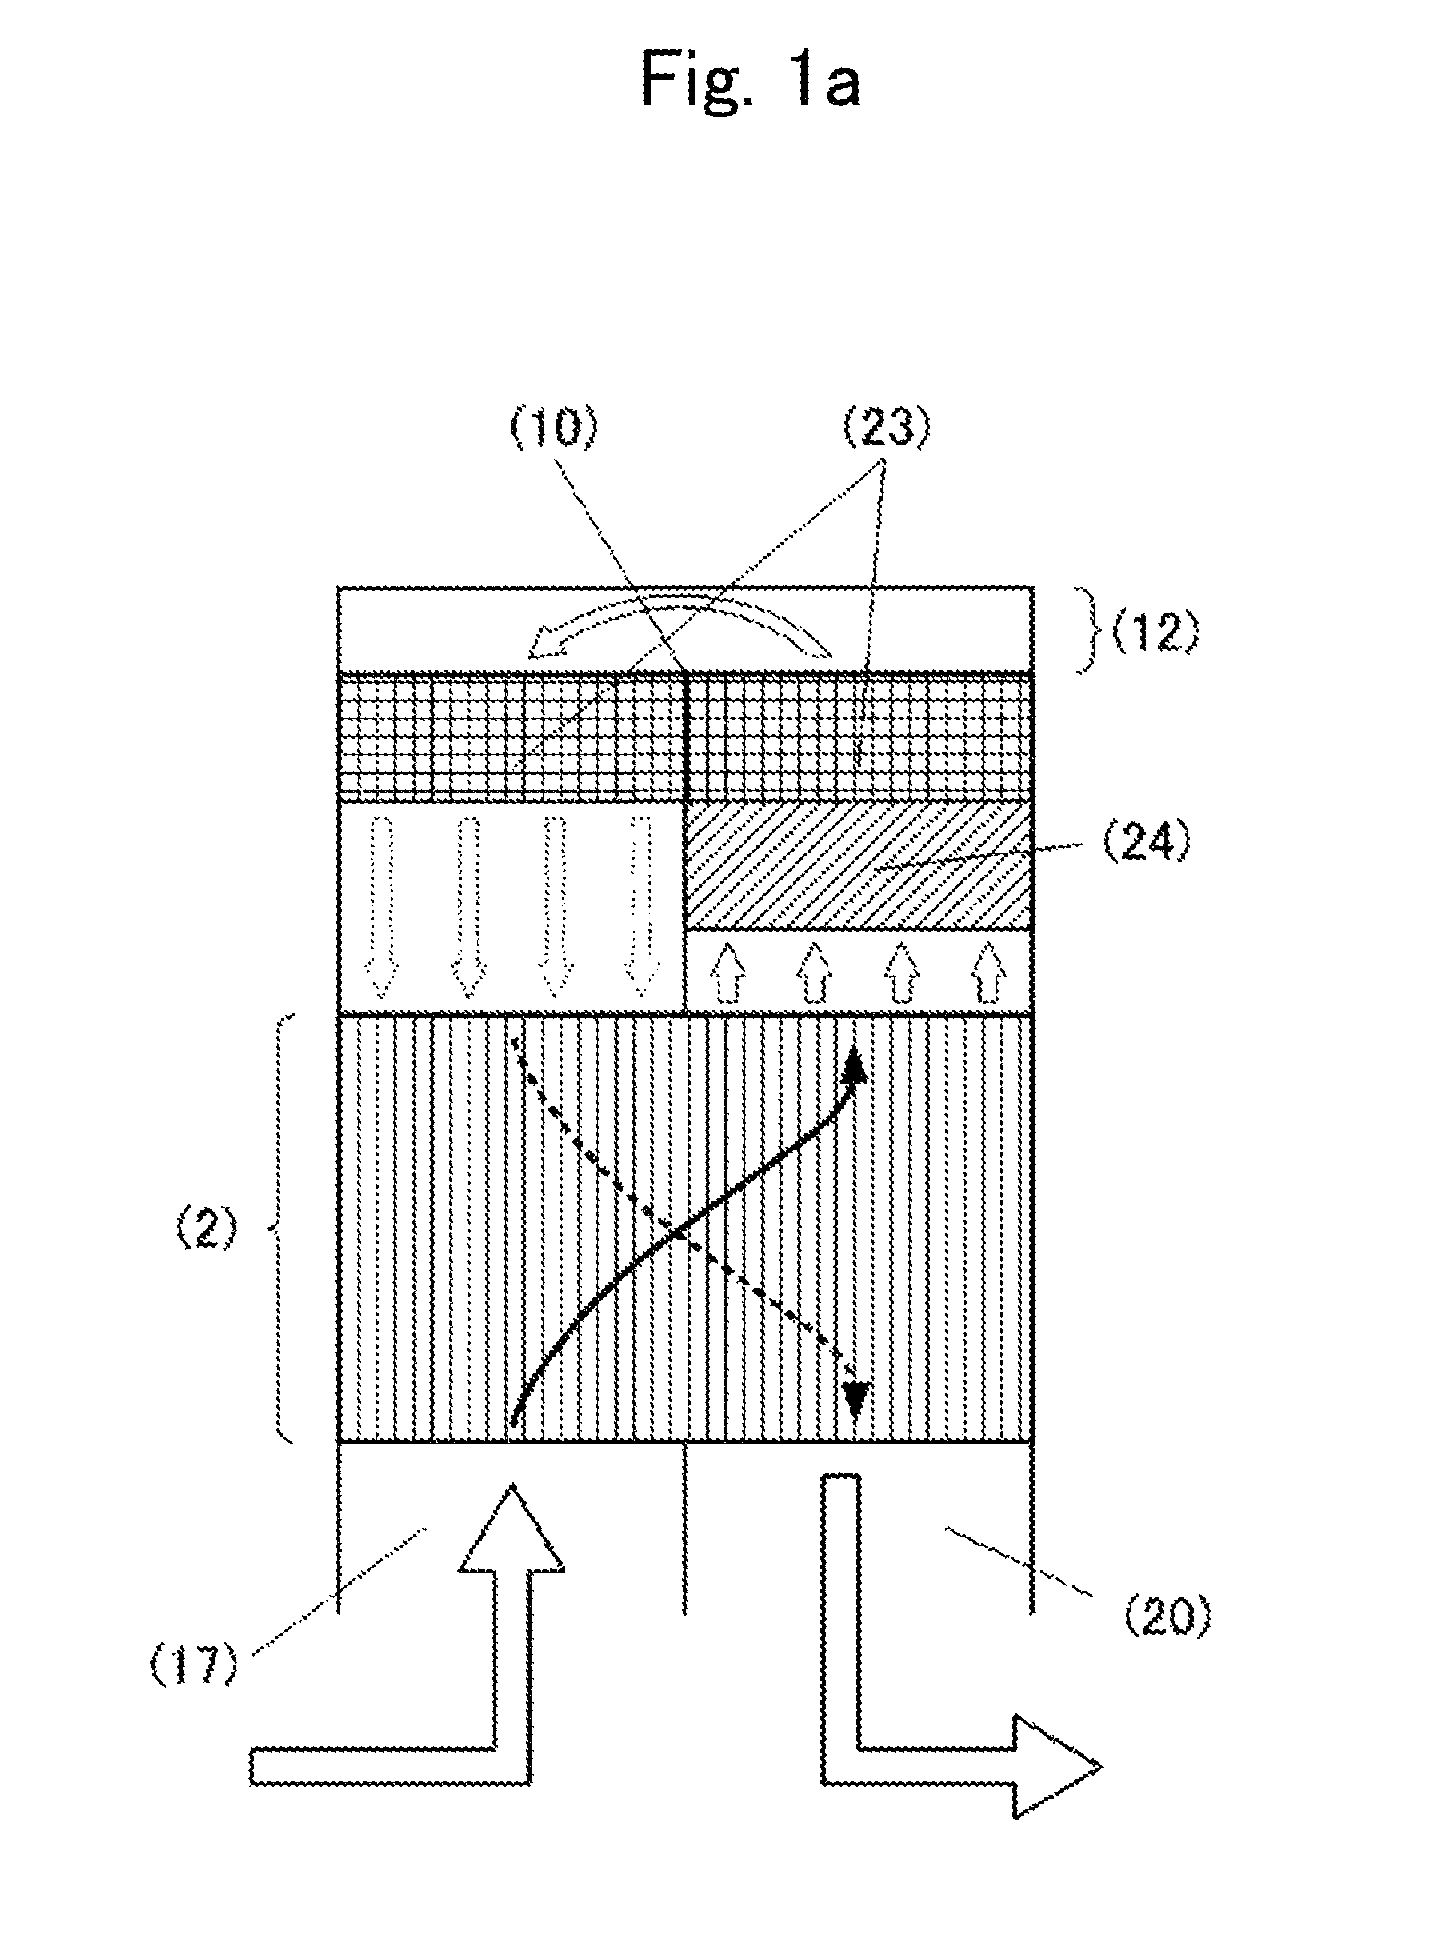 Heat exchanger-integrated reaction device having supplying and return ducts for reaction section